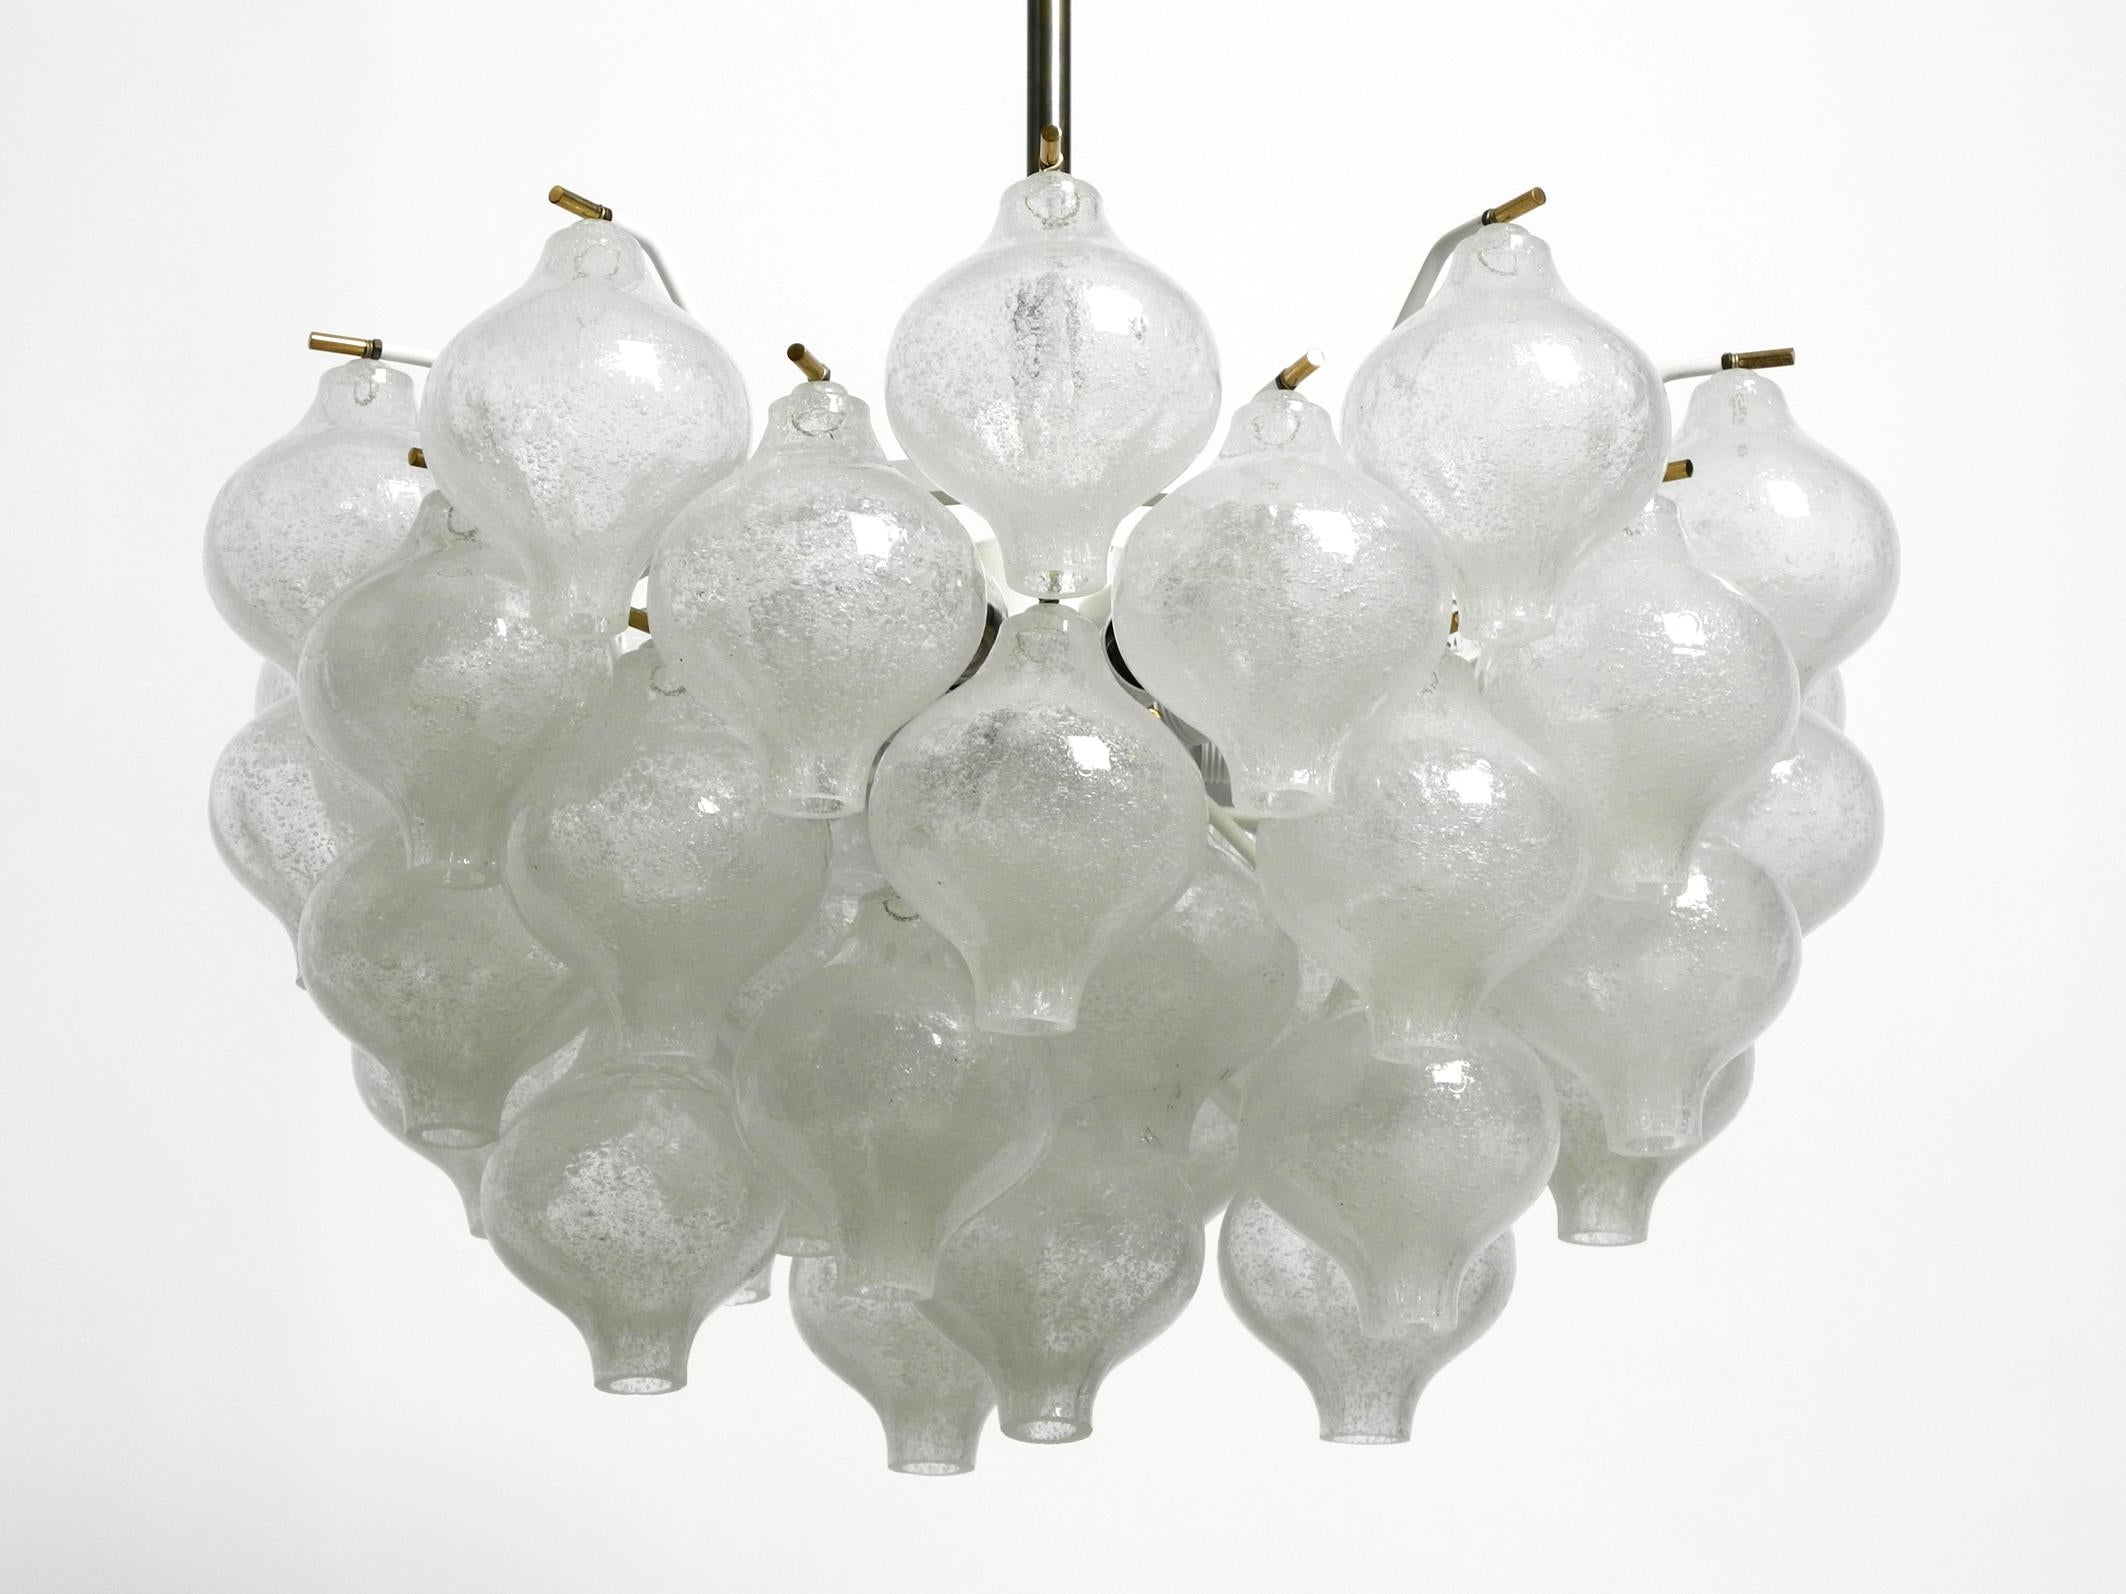 Beautiful large 1960s Kalmar Franken ceiling lamp model Tulipan.
Stunning beautiful high-quality design. Made in Austria. With original label.
With a long rod for high ceilings or over a table. Rod can be shortened on demand.
With 41 ice glasses